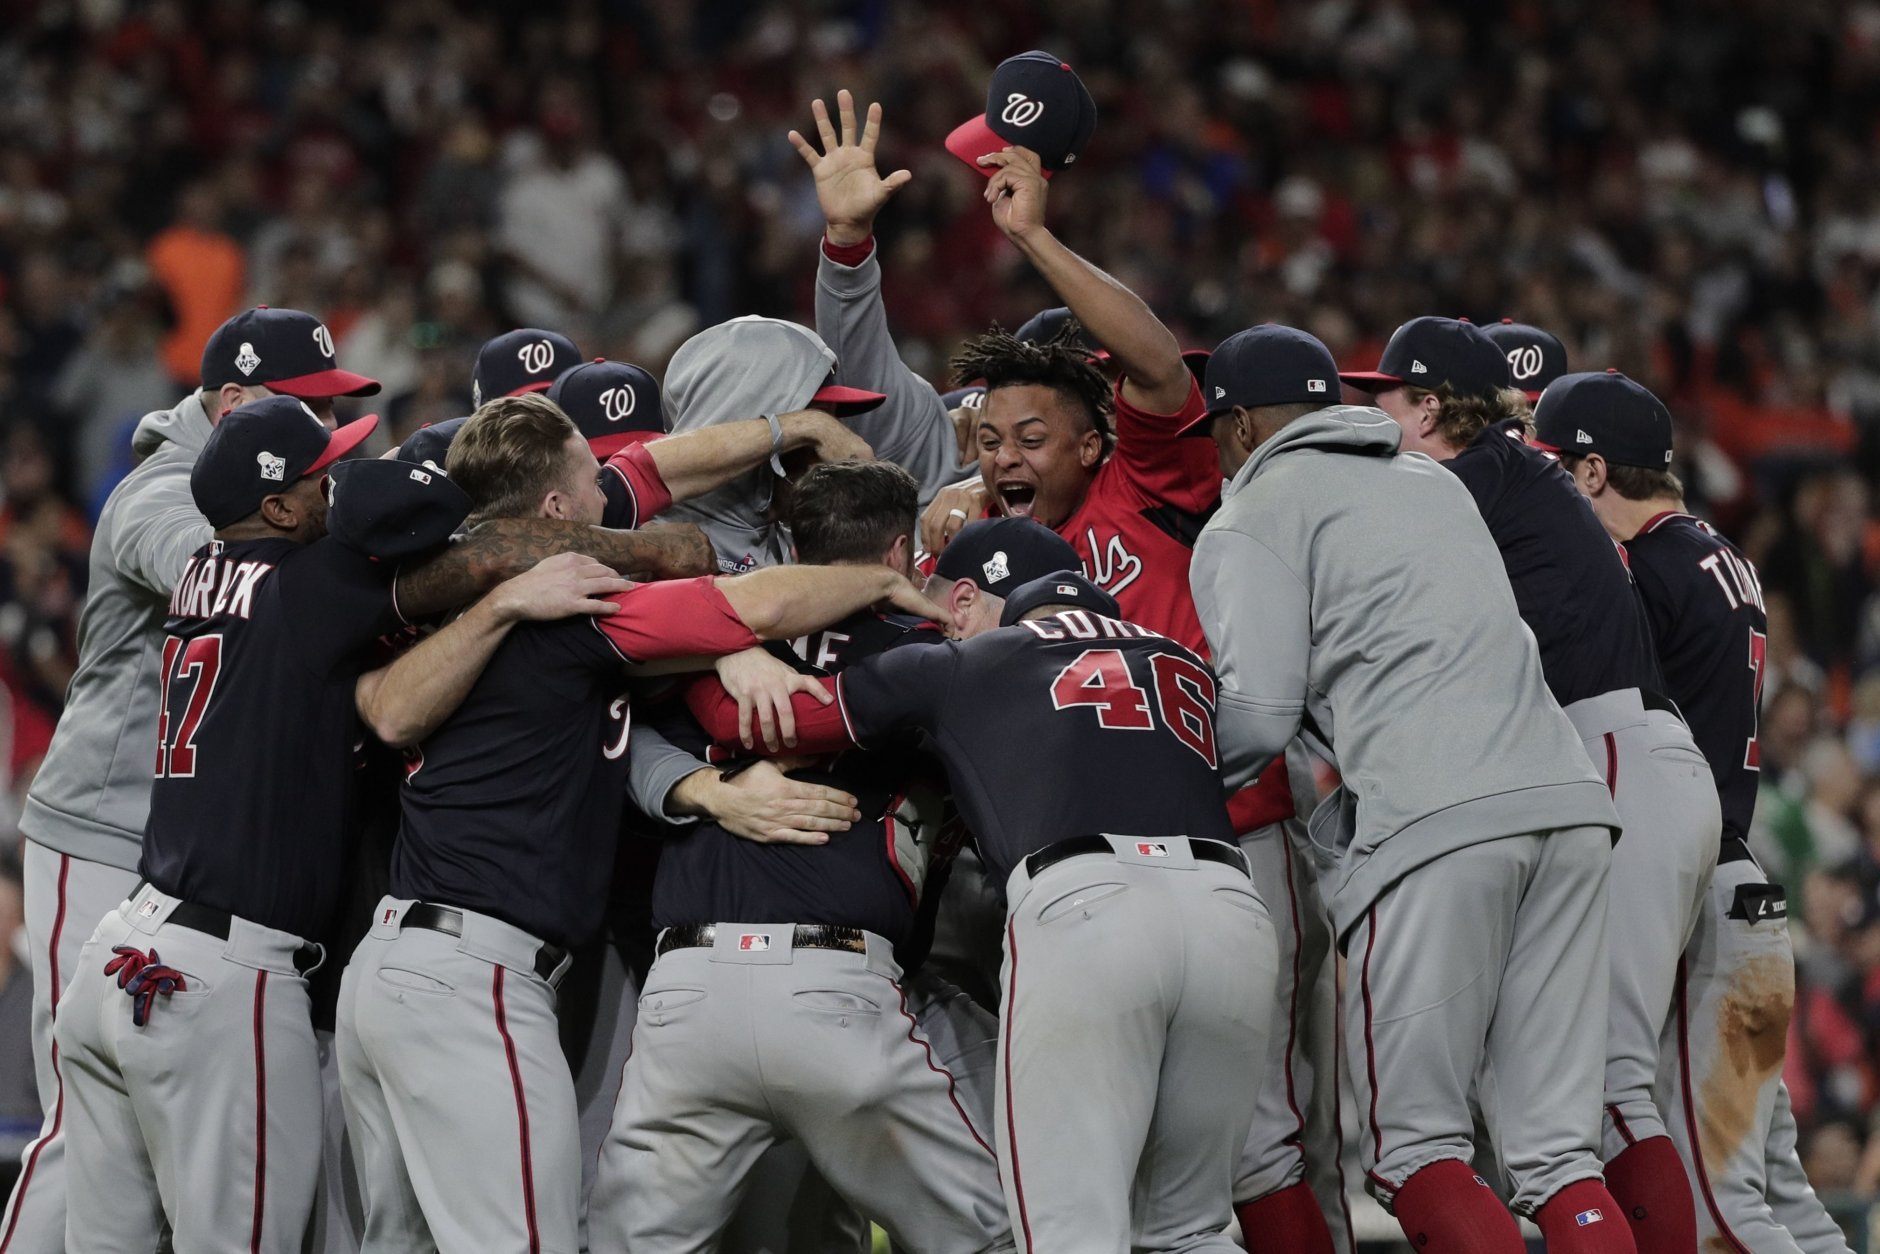 The Washington Nationals celebrate after Game 7 of the baseball World Series against the Houston Astros Wednesday, Oct. 30, 2019, in Houston. The Nationals won 6-2 to win the series. (AP Photo/David J. Phillip)